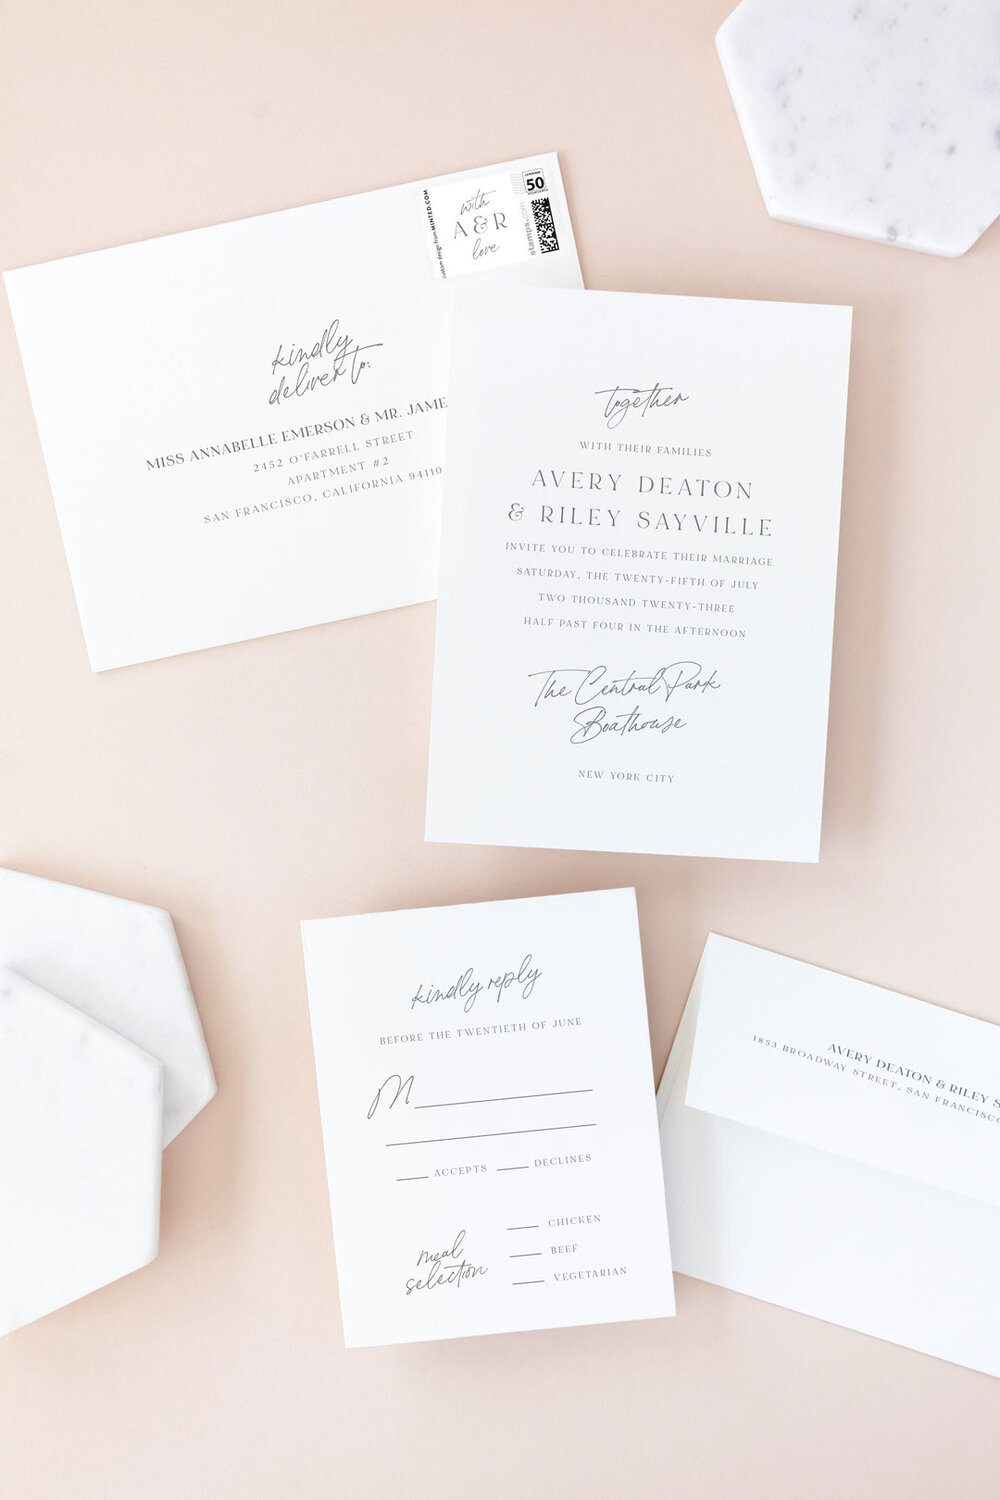 Minted Composure Grey and White Formal Wedding invitation by Jackie Mangiolino